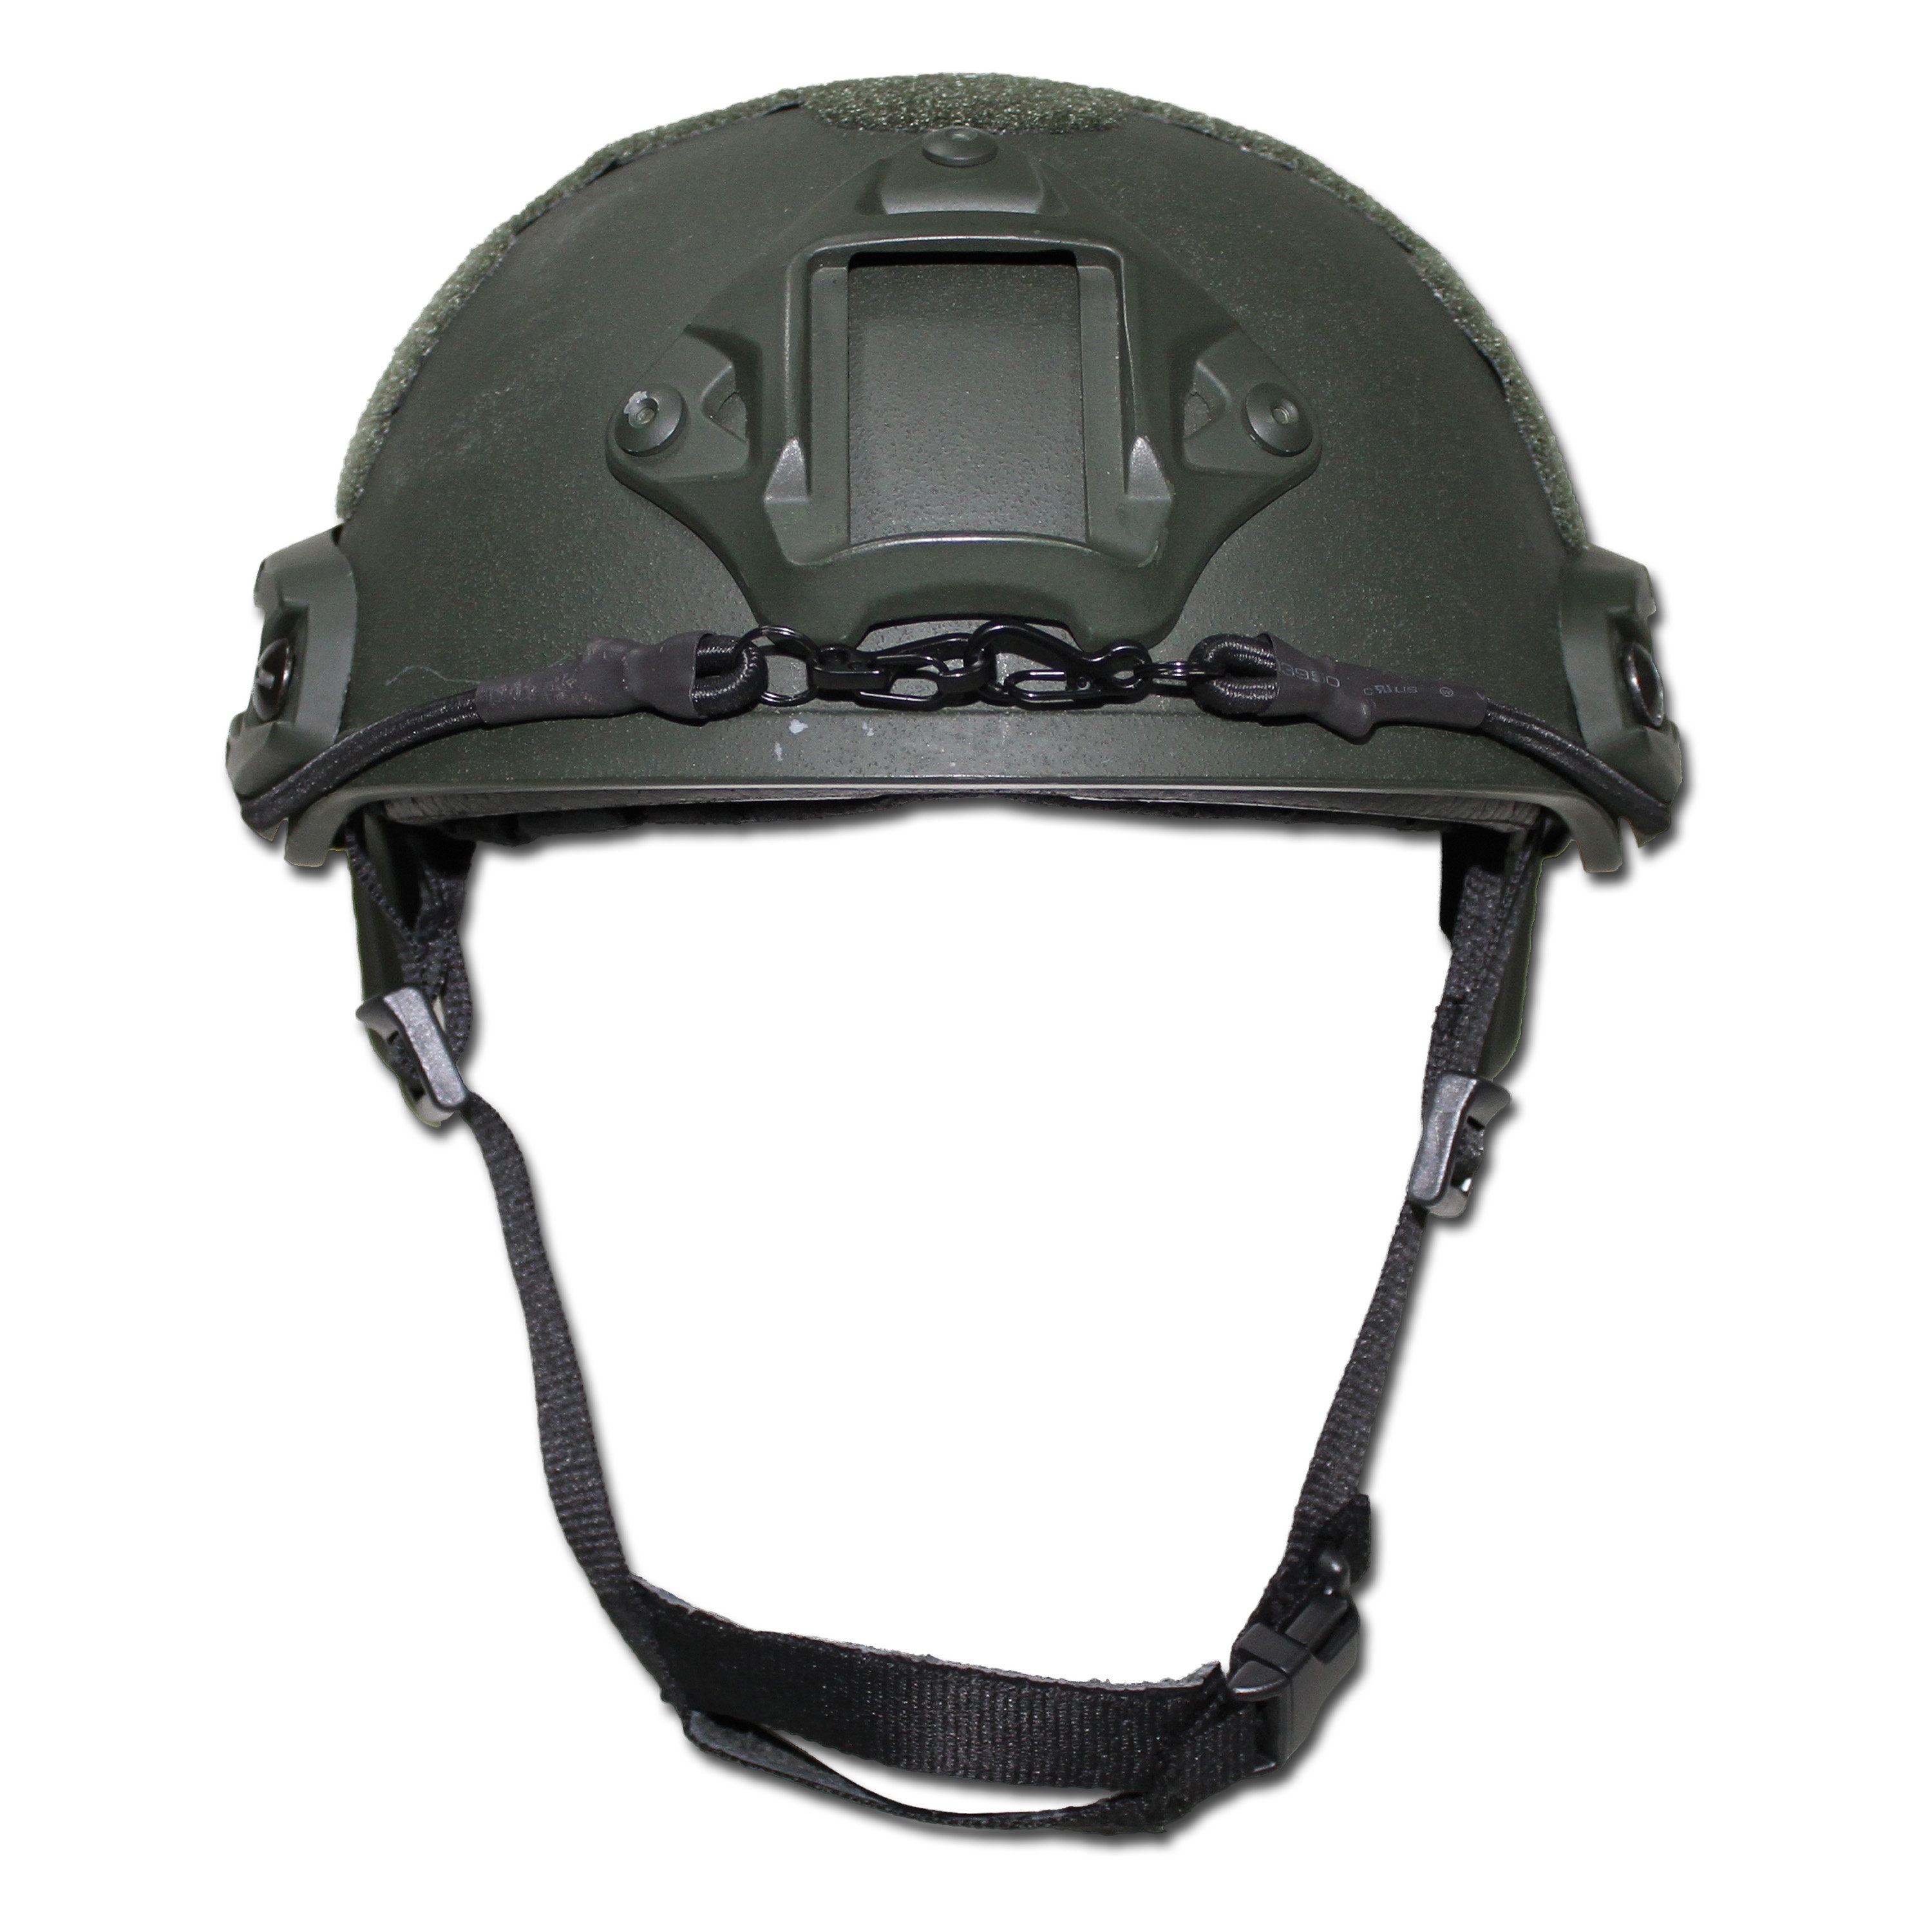 US MILITARY COMBAT HELMET 2001 MICH PADDED RAILED NV MOUNT HEAD PROTECTION BLACK 